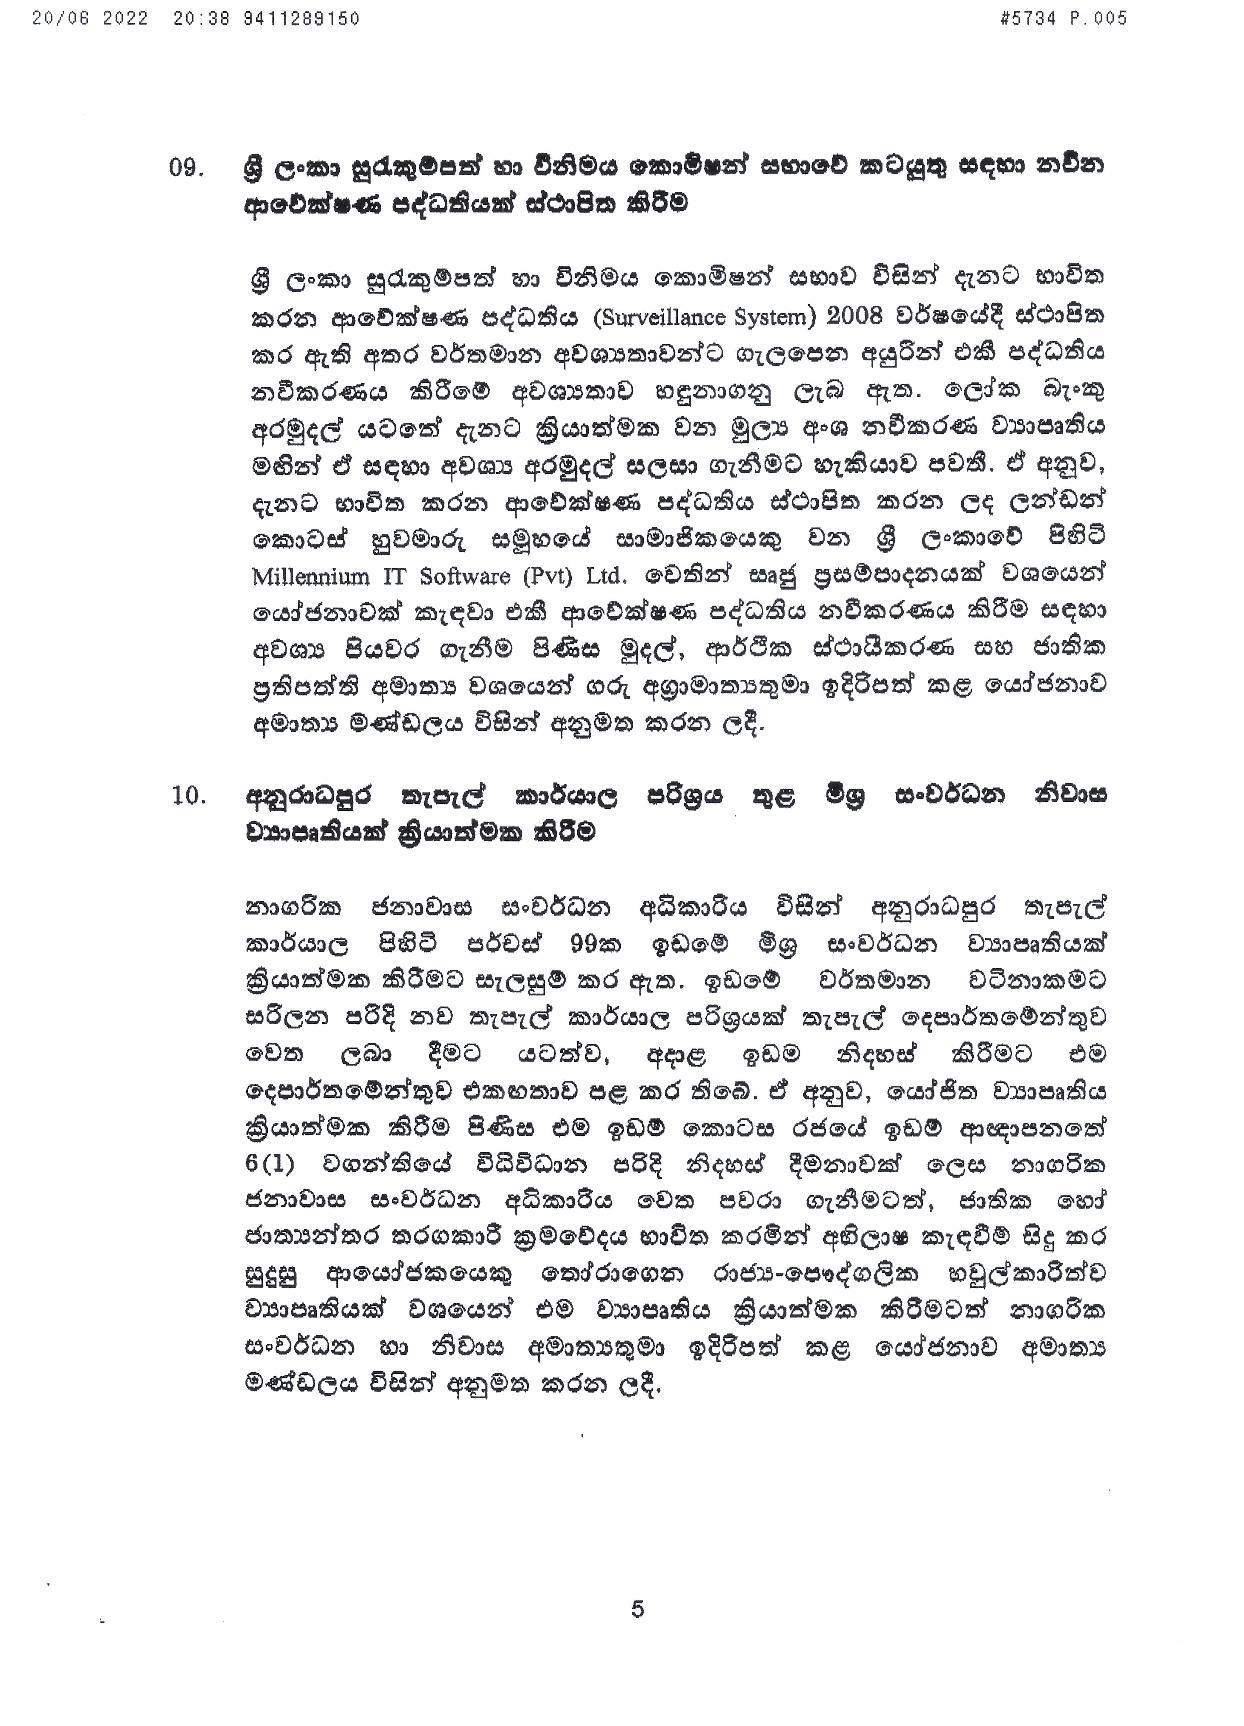 Cabinet Decision on 20.06.2022 page 005